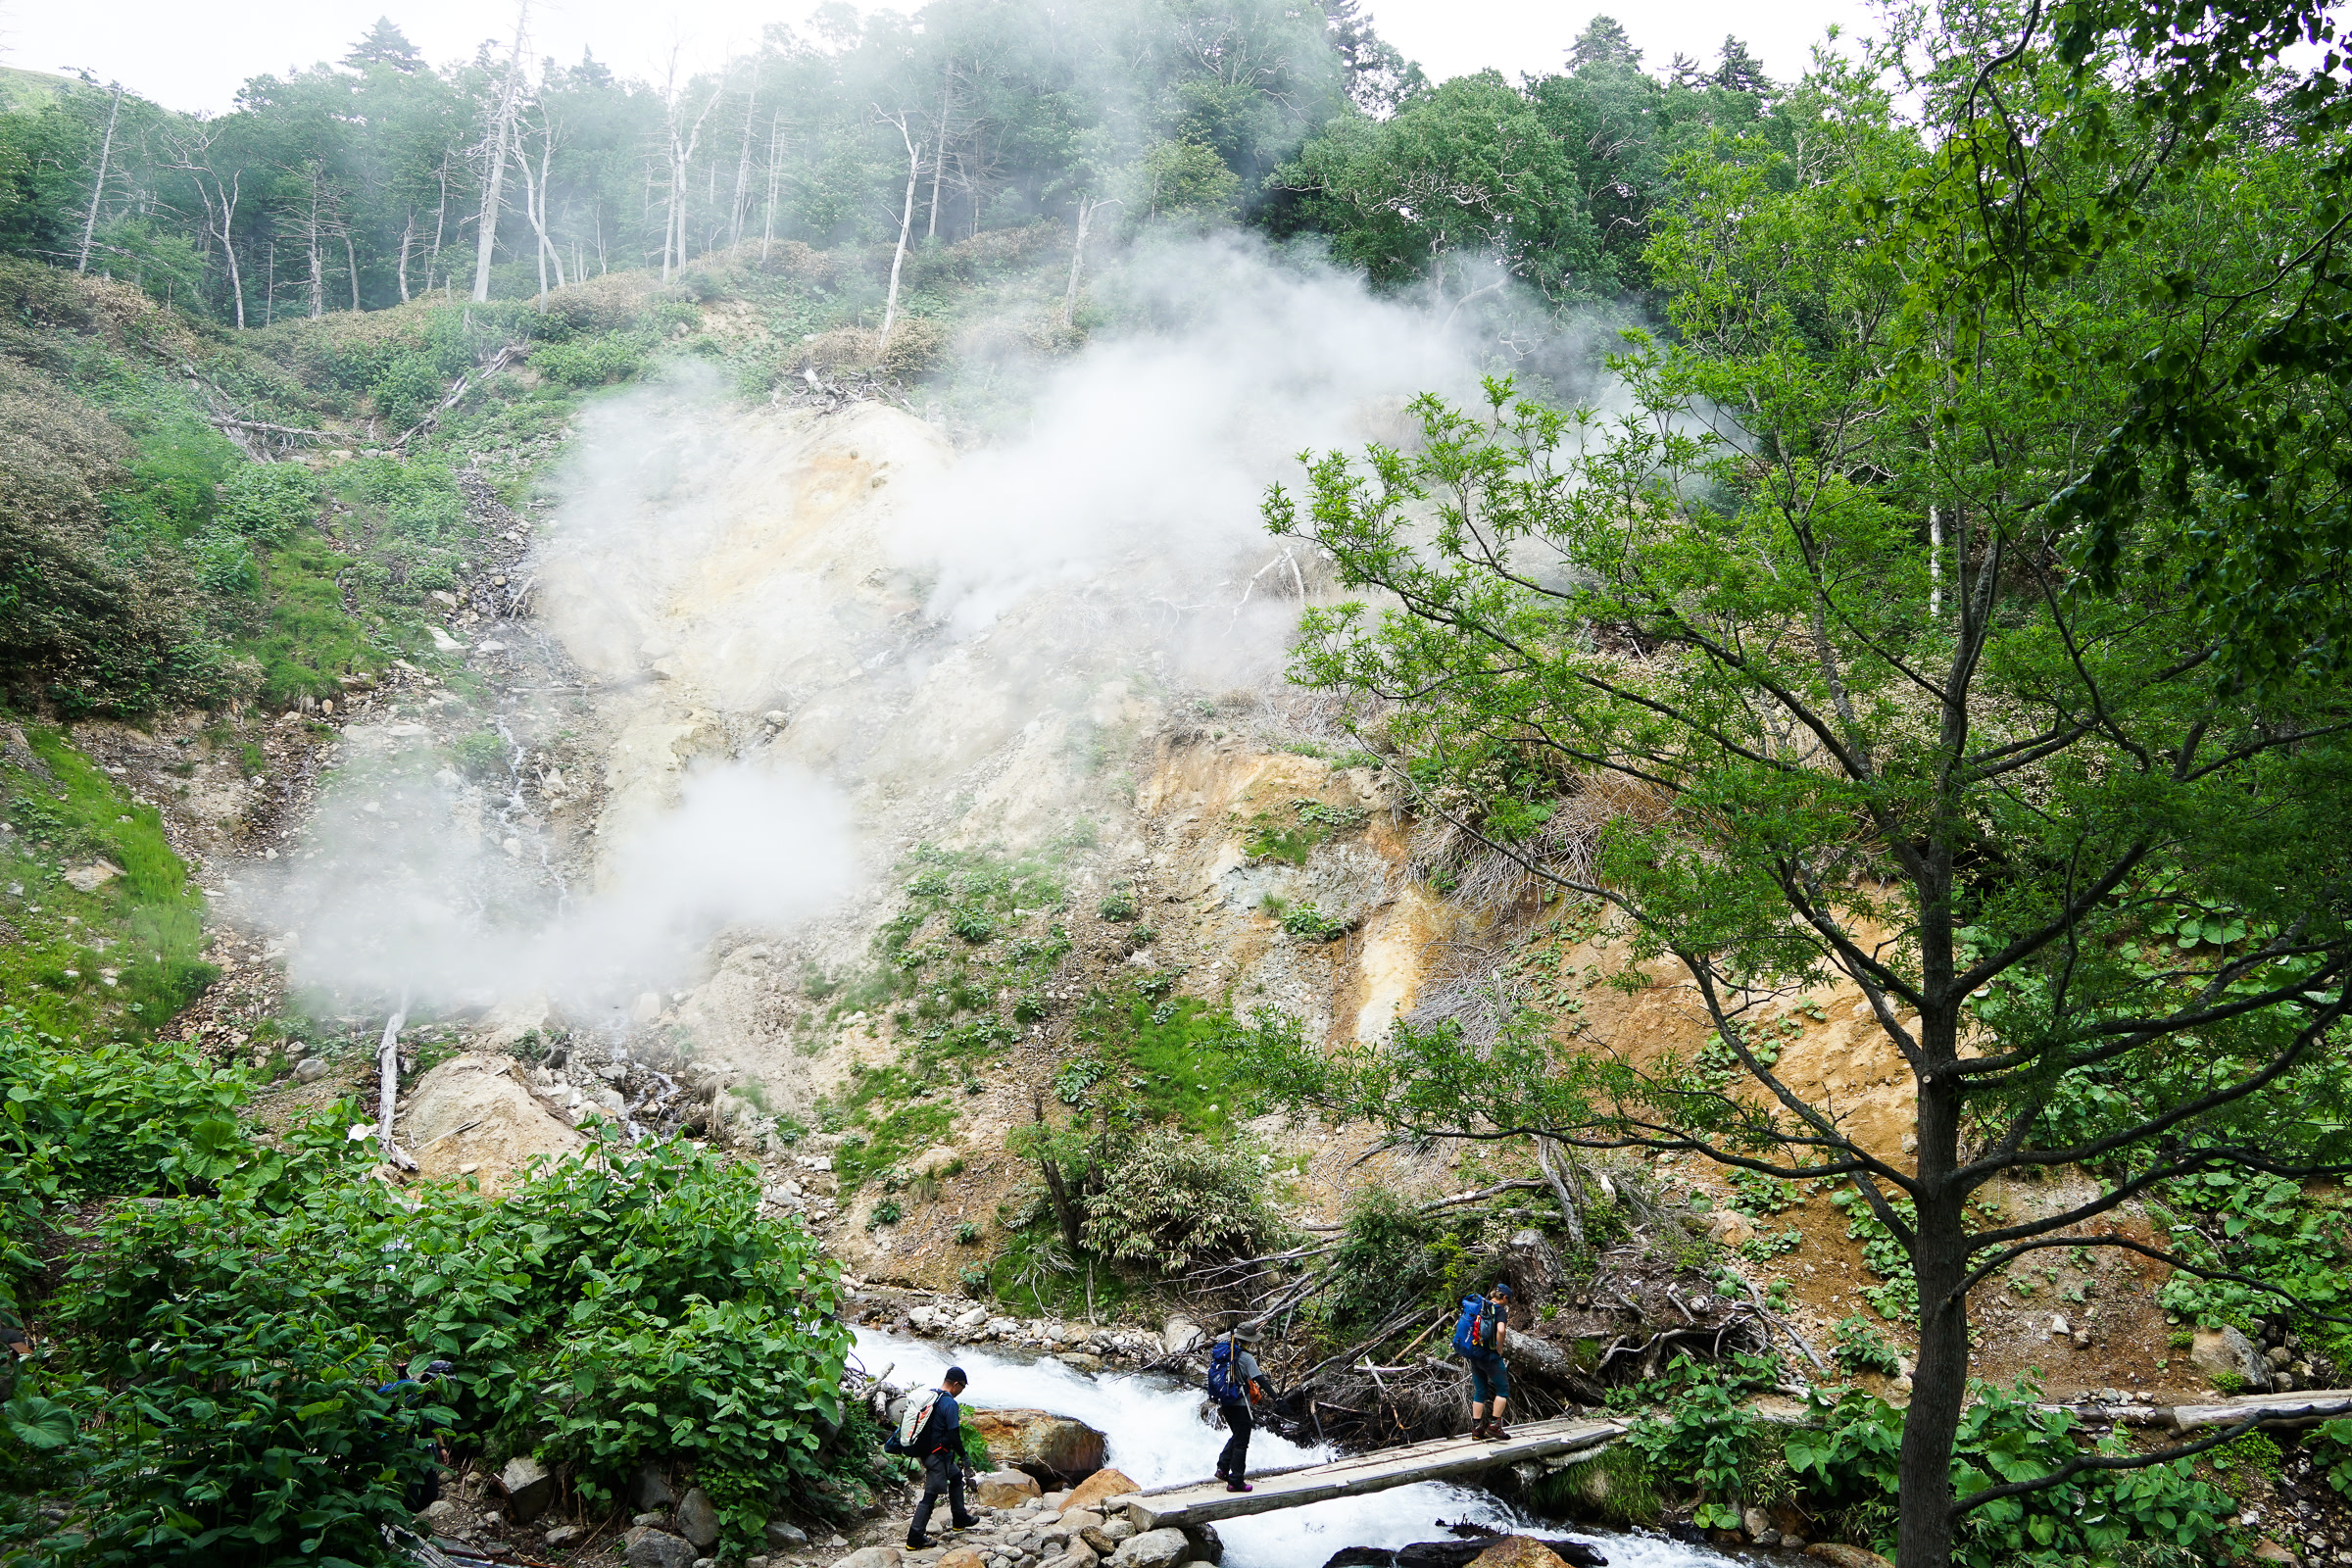 Hikers cross a stream at Kogen Numa while steam billows out of a fumarole.